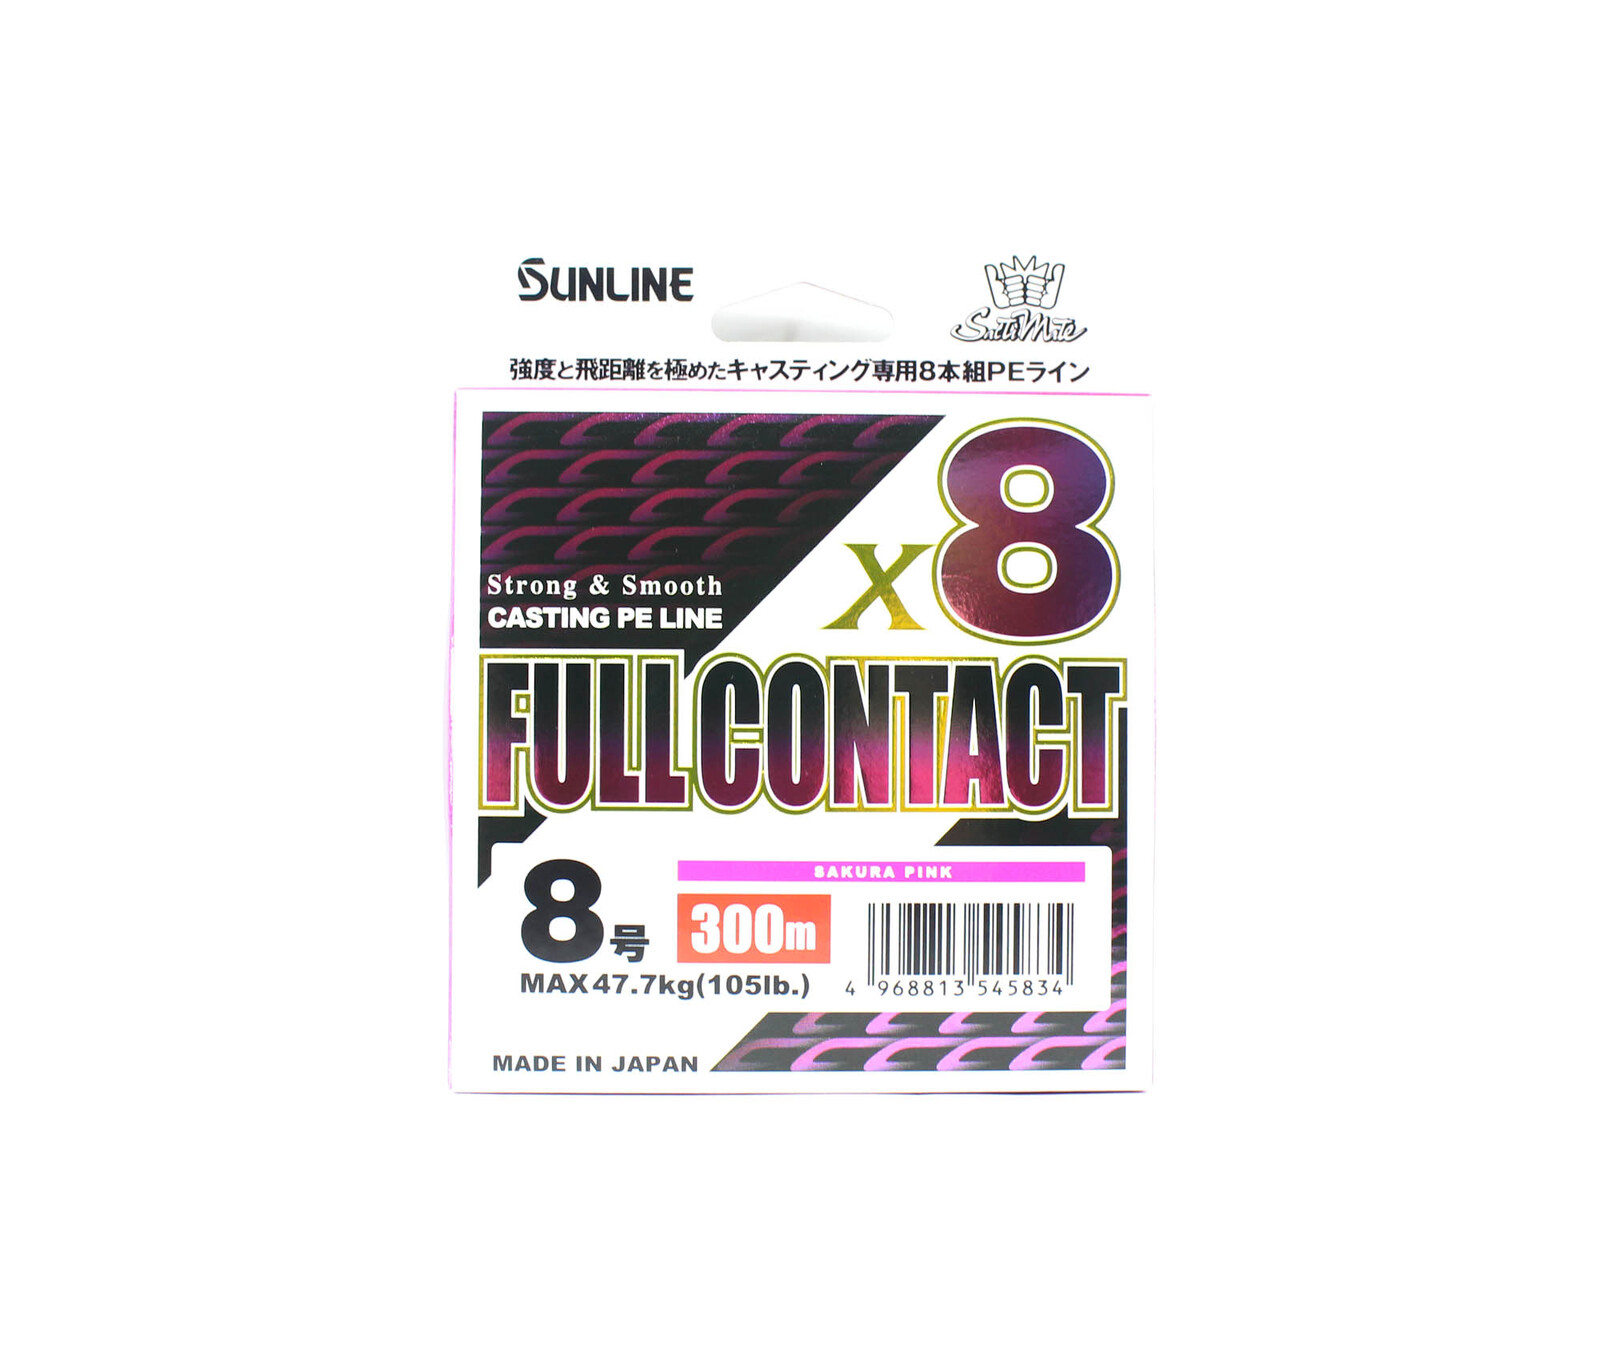 Sunline Full Contact 300m x8 Pink Offshore Casting Braid Fishing